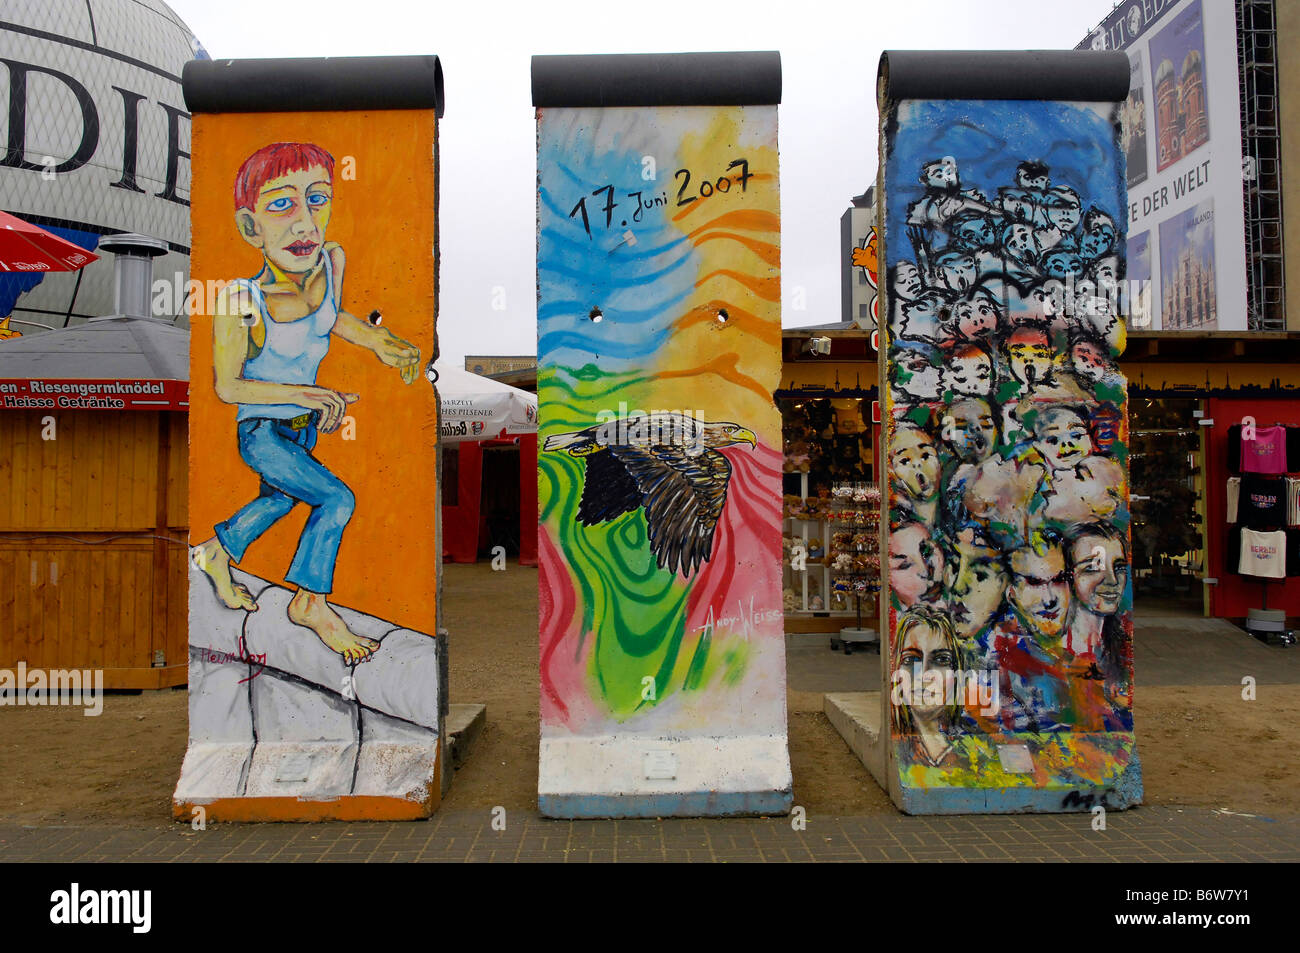 berlin wall eastside gallery germany deutschland art travel tourism history heritage culture DDR east remnants Stock Photo